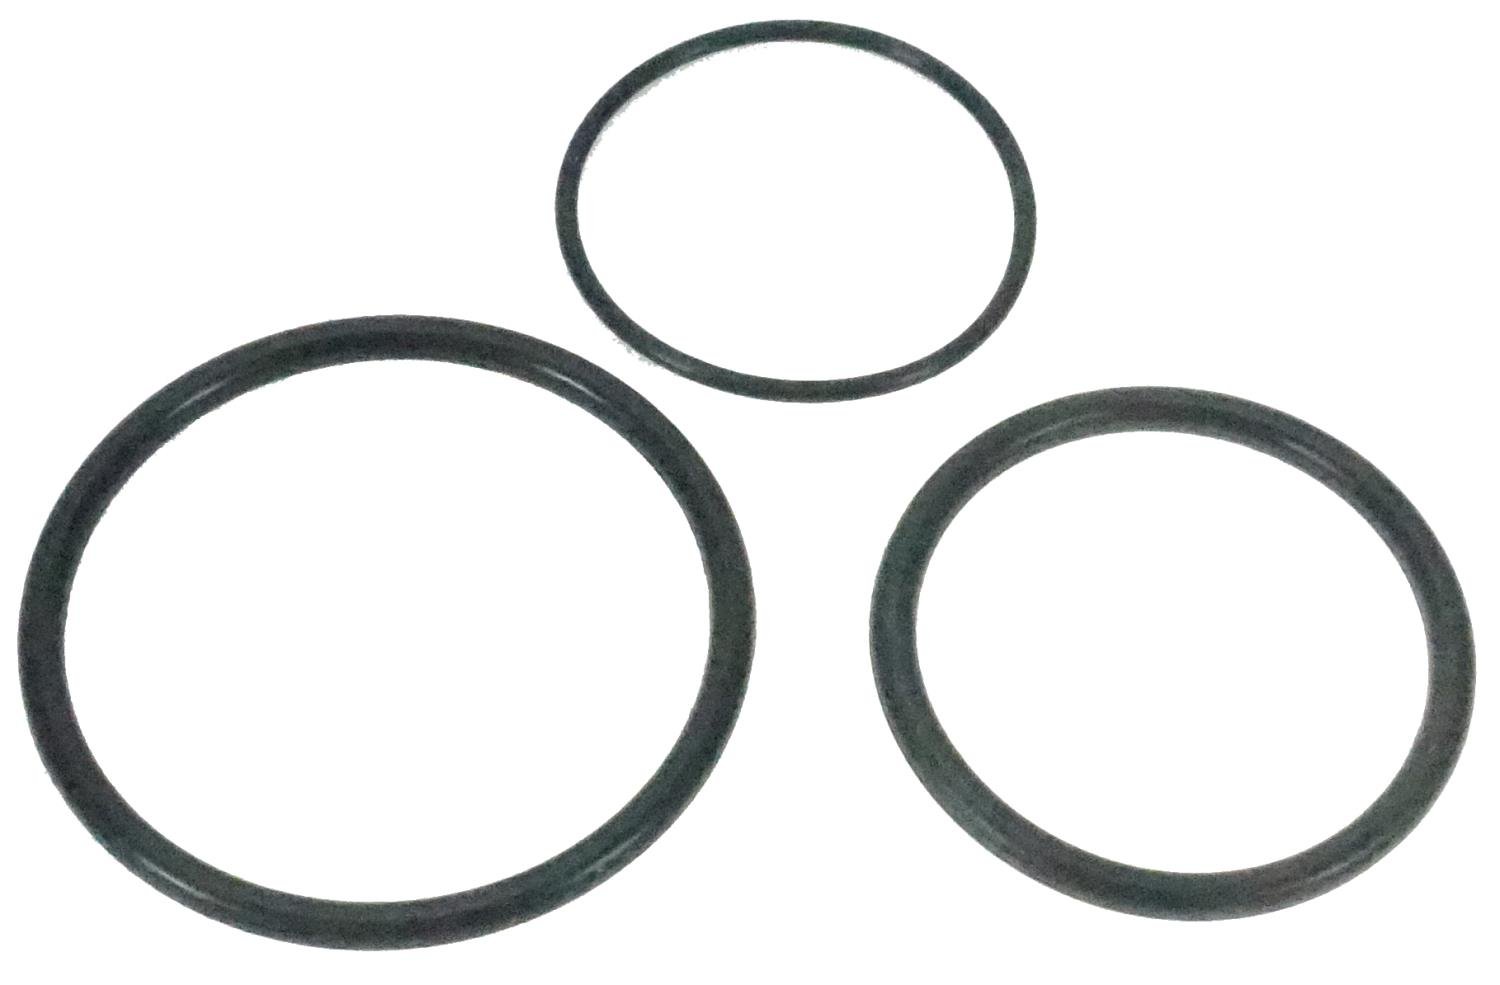 Replacement O-Ring Set Fits All HD Hydraulic Bearings